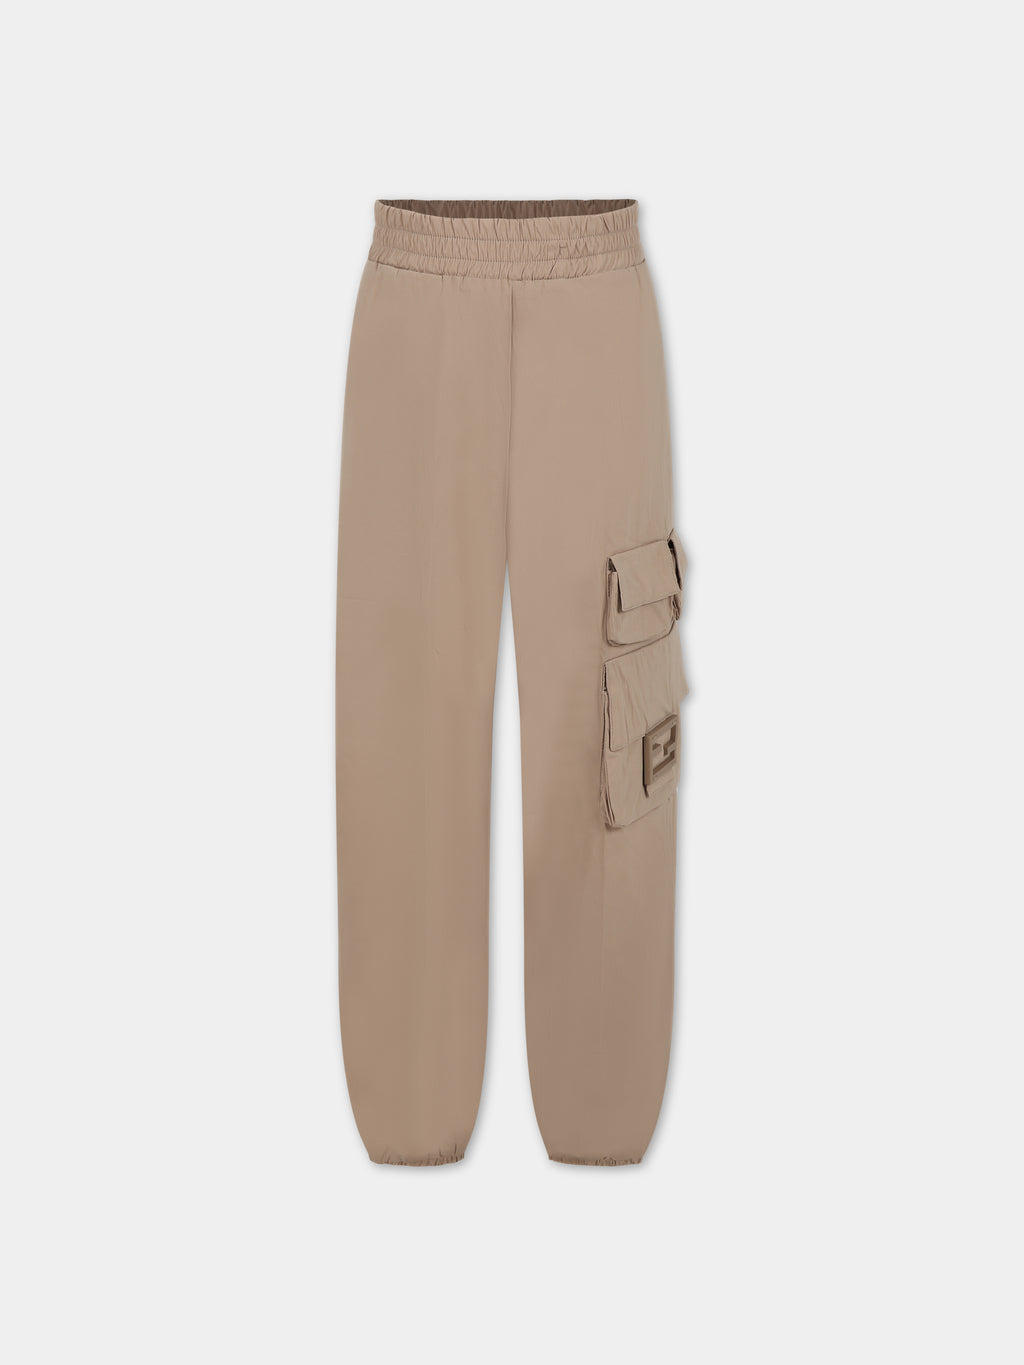 Brown trousers for kids with double FF